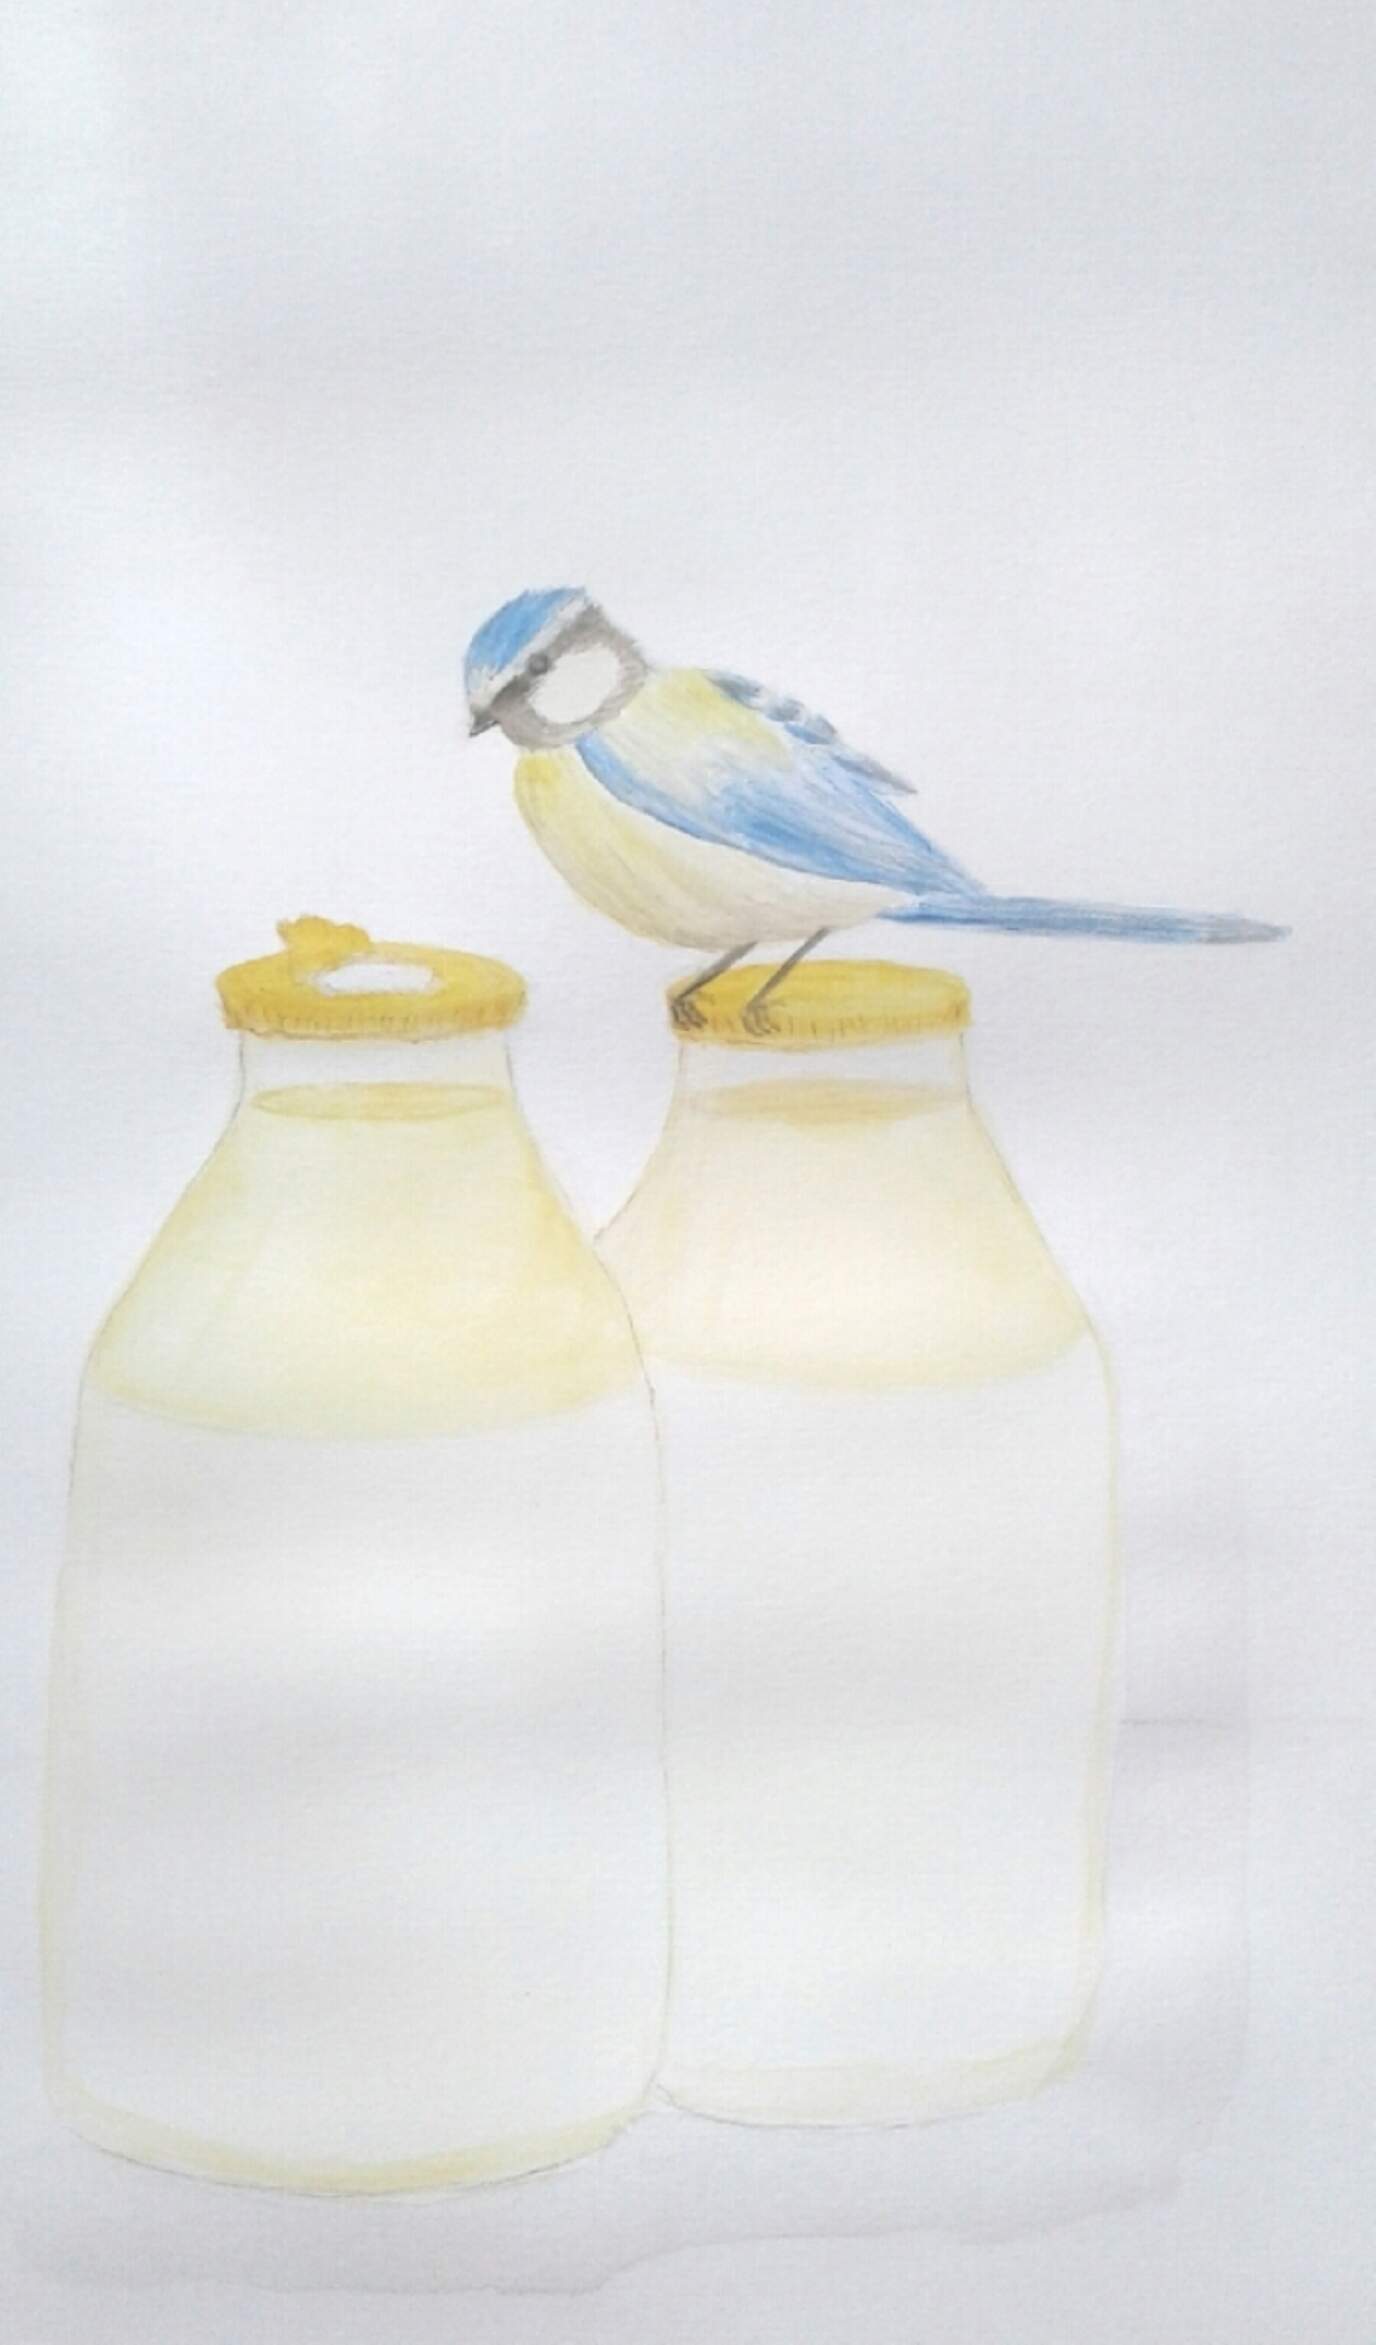 Winter, when birds used to peck at the gold top milk.